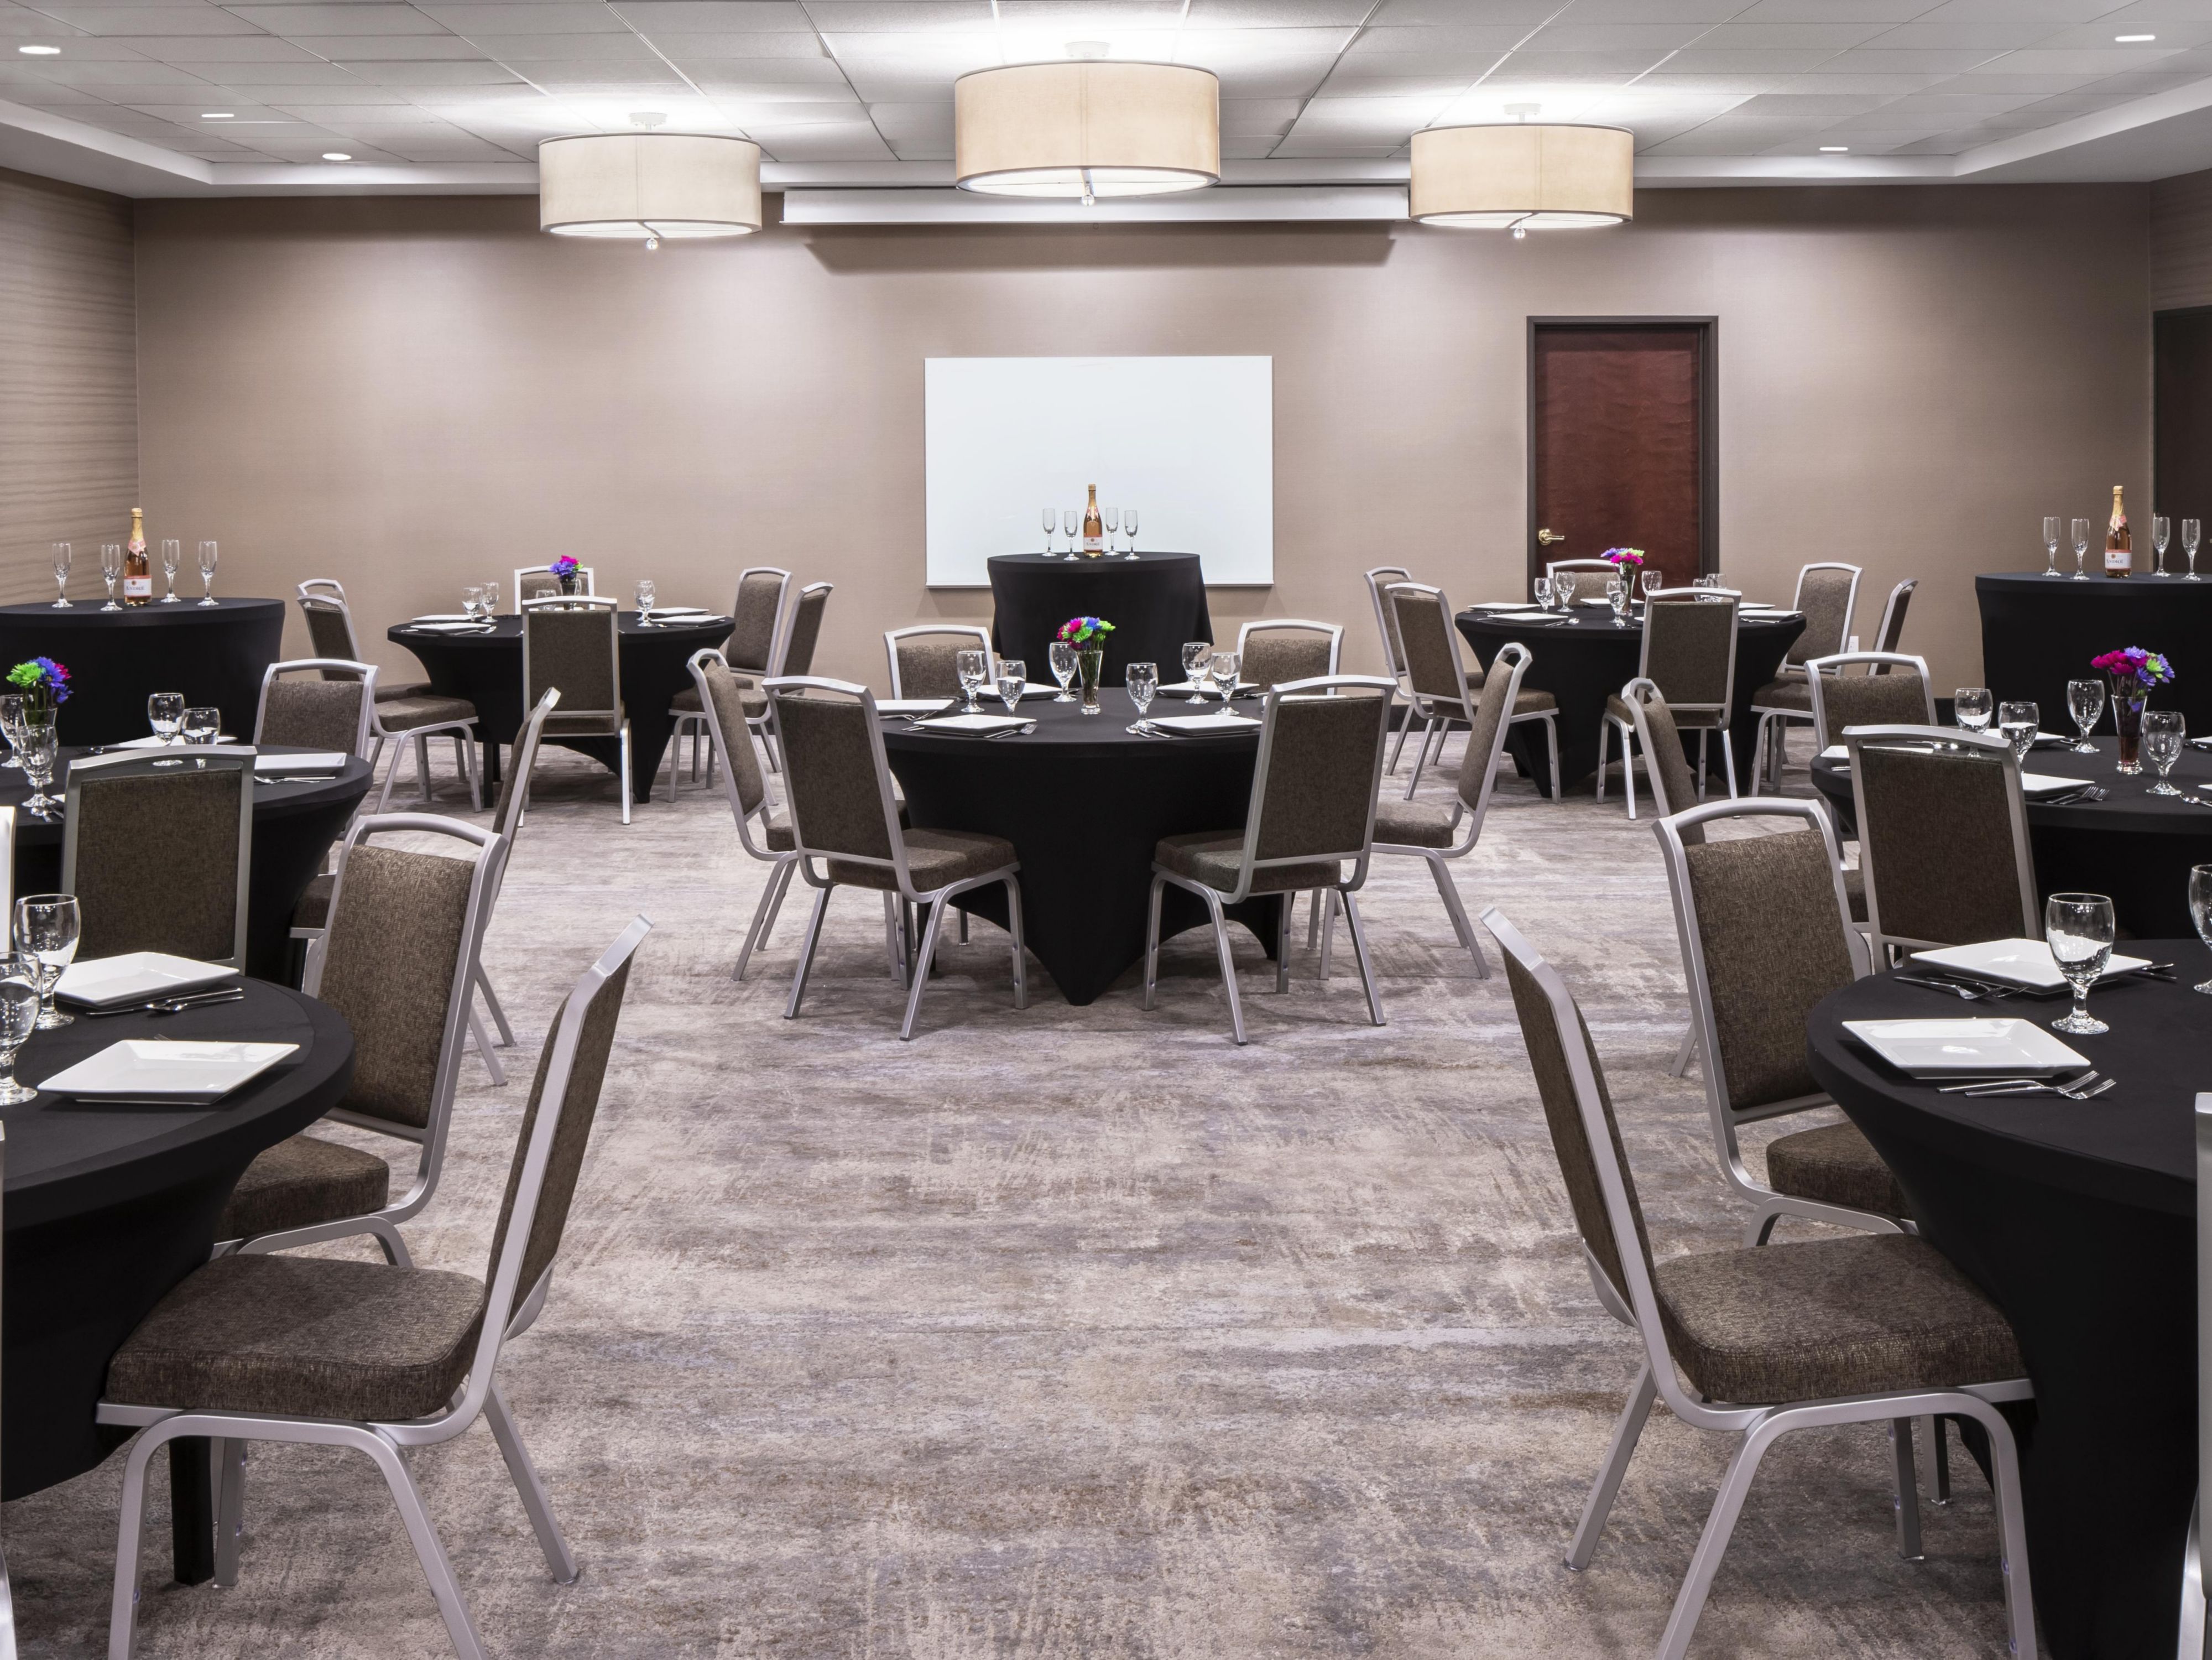 Social gatherings are happening again with some social distancing restrictions in place. Host your next reunion, retreat, conference, or holiday party at our Odessa hotel. Our hotel has three meeting rooms that can host groups of up to 120 guests.